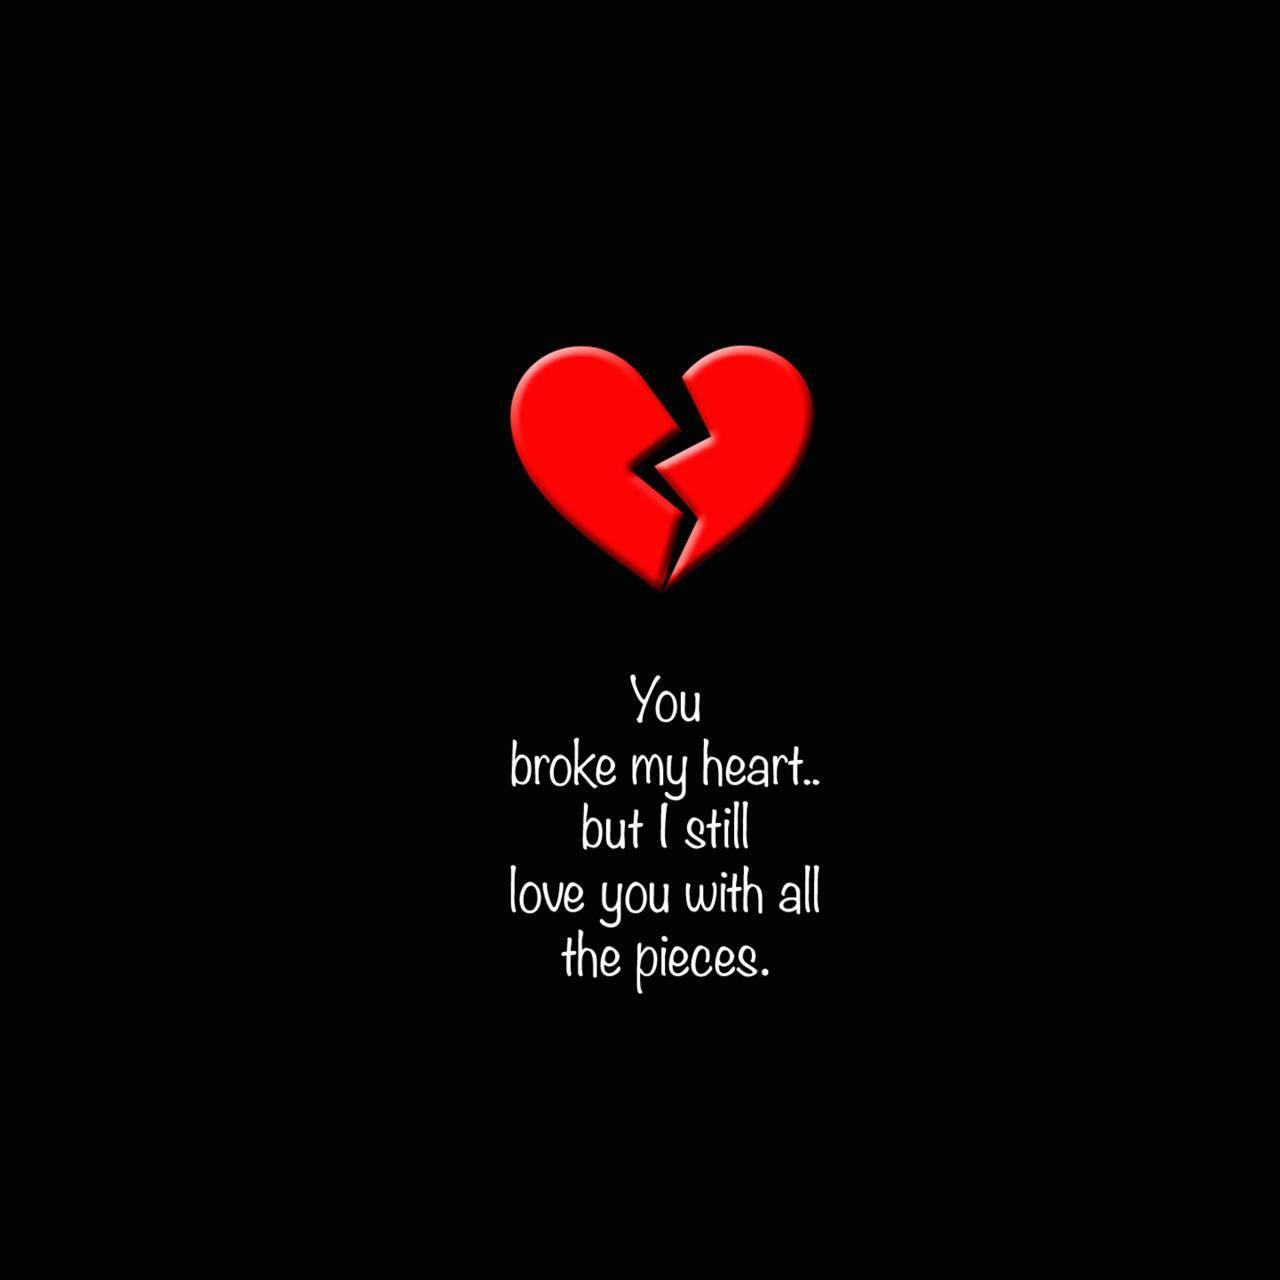 Broken Heart. Broken heart wallpaper, Broken heart quotes breakup, Heart quotes